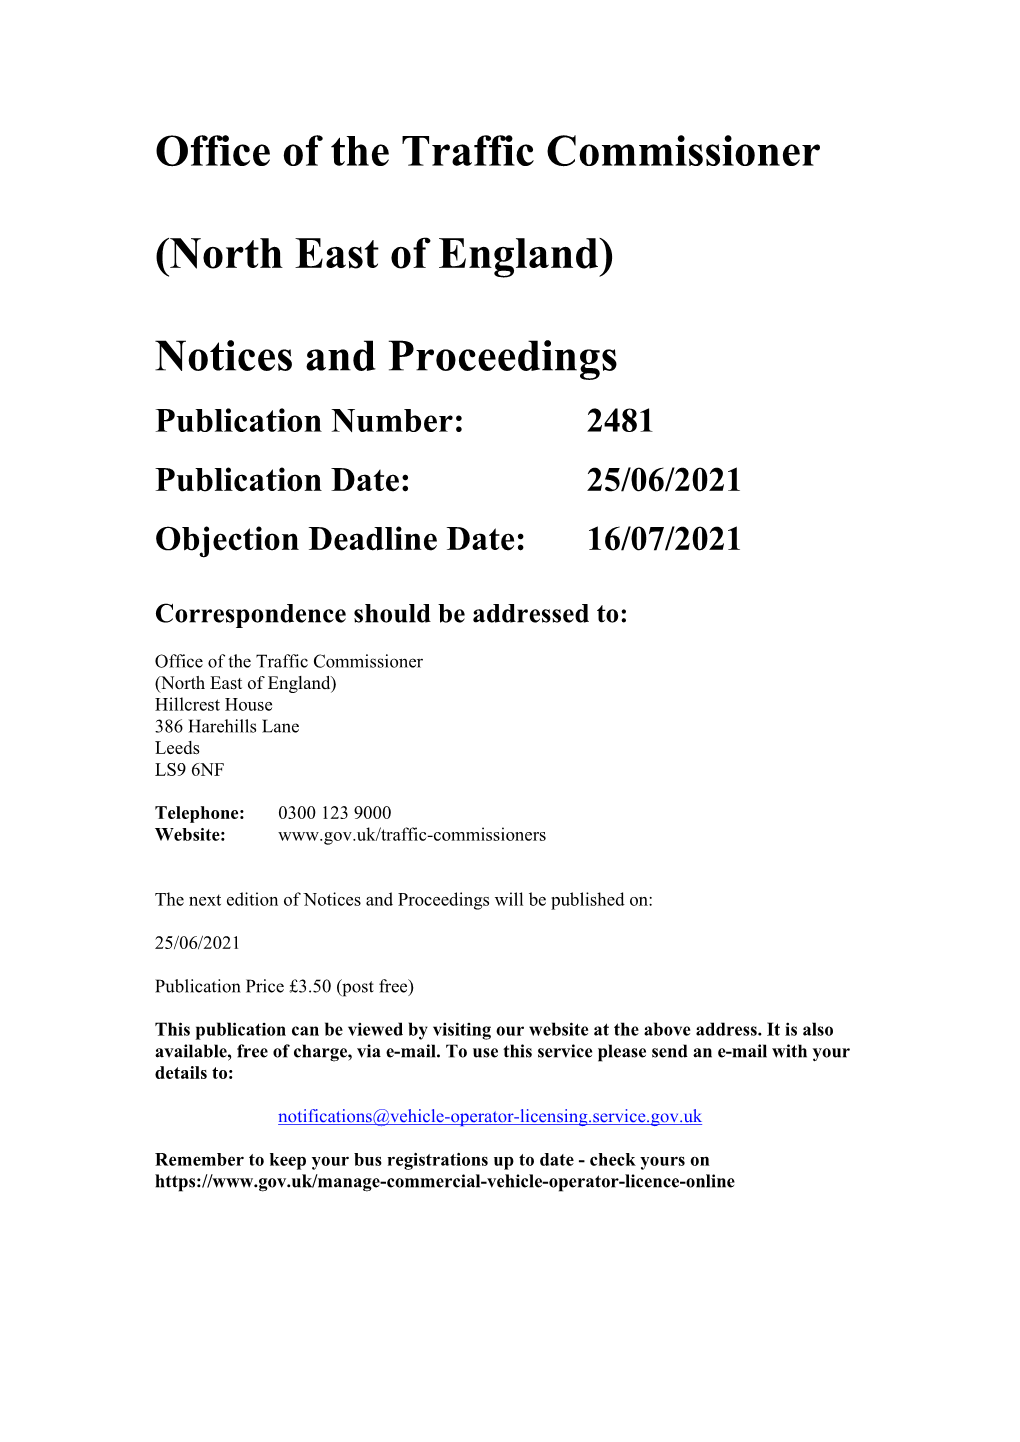 Office of the Traffic Commissioner (North East of England) Notices And